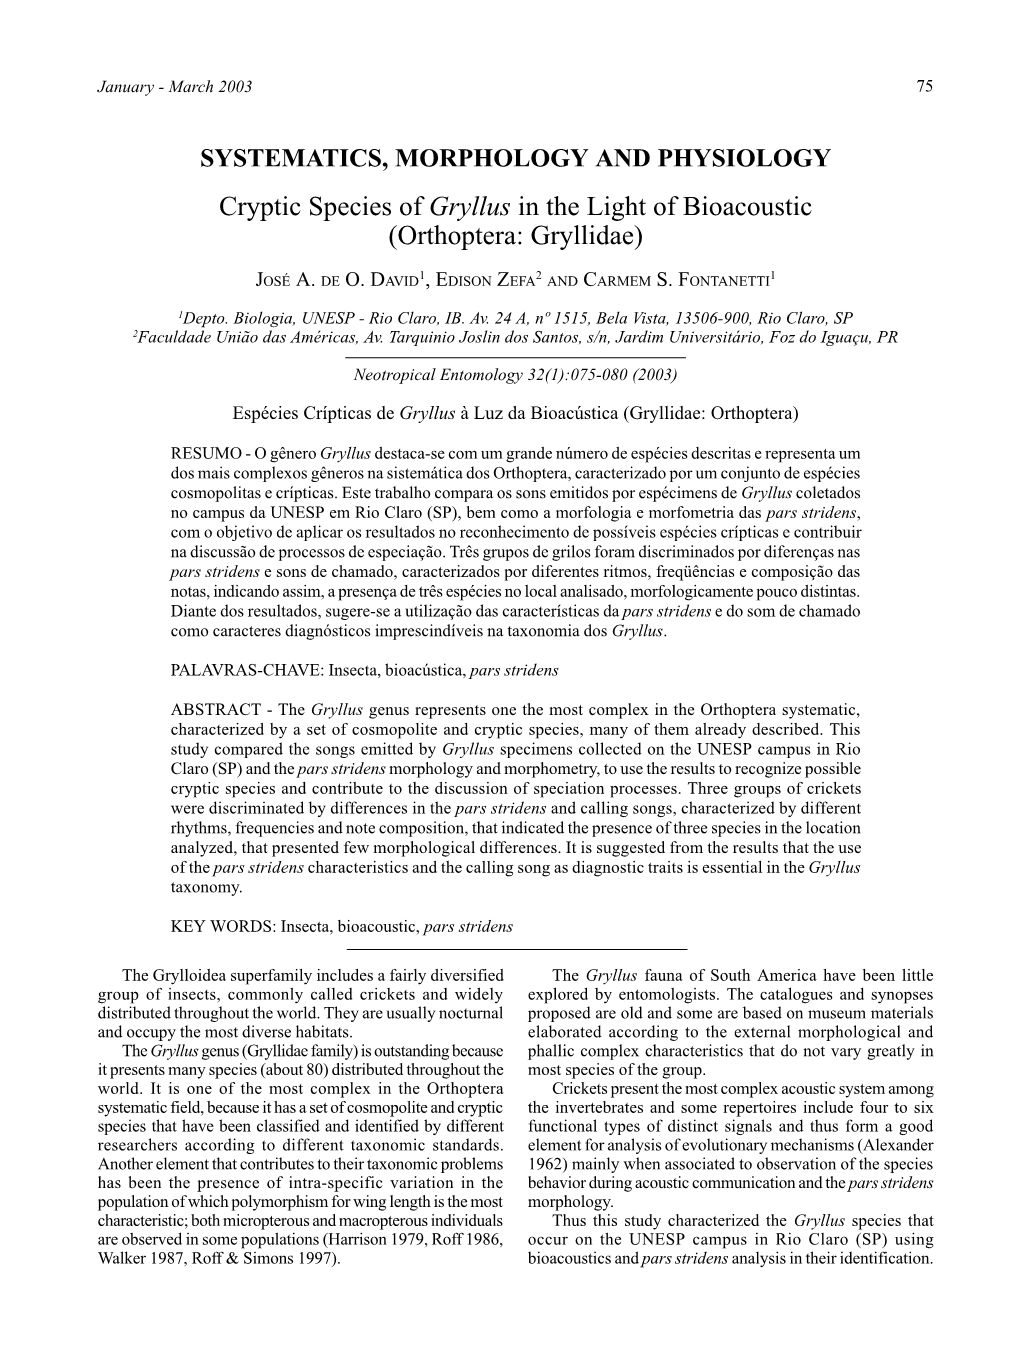 Cryptic Species of Gryllus in the Light of Bioacoustic (Orthoptera: Gryllidae)